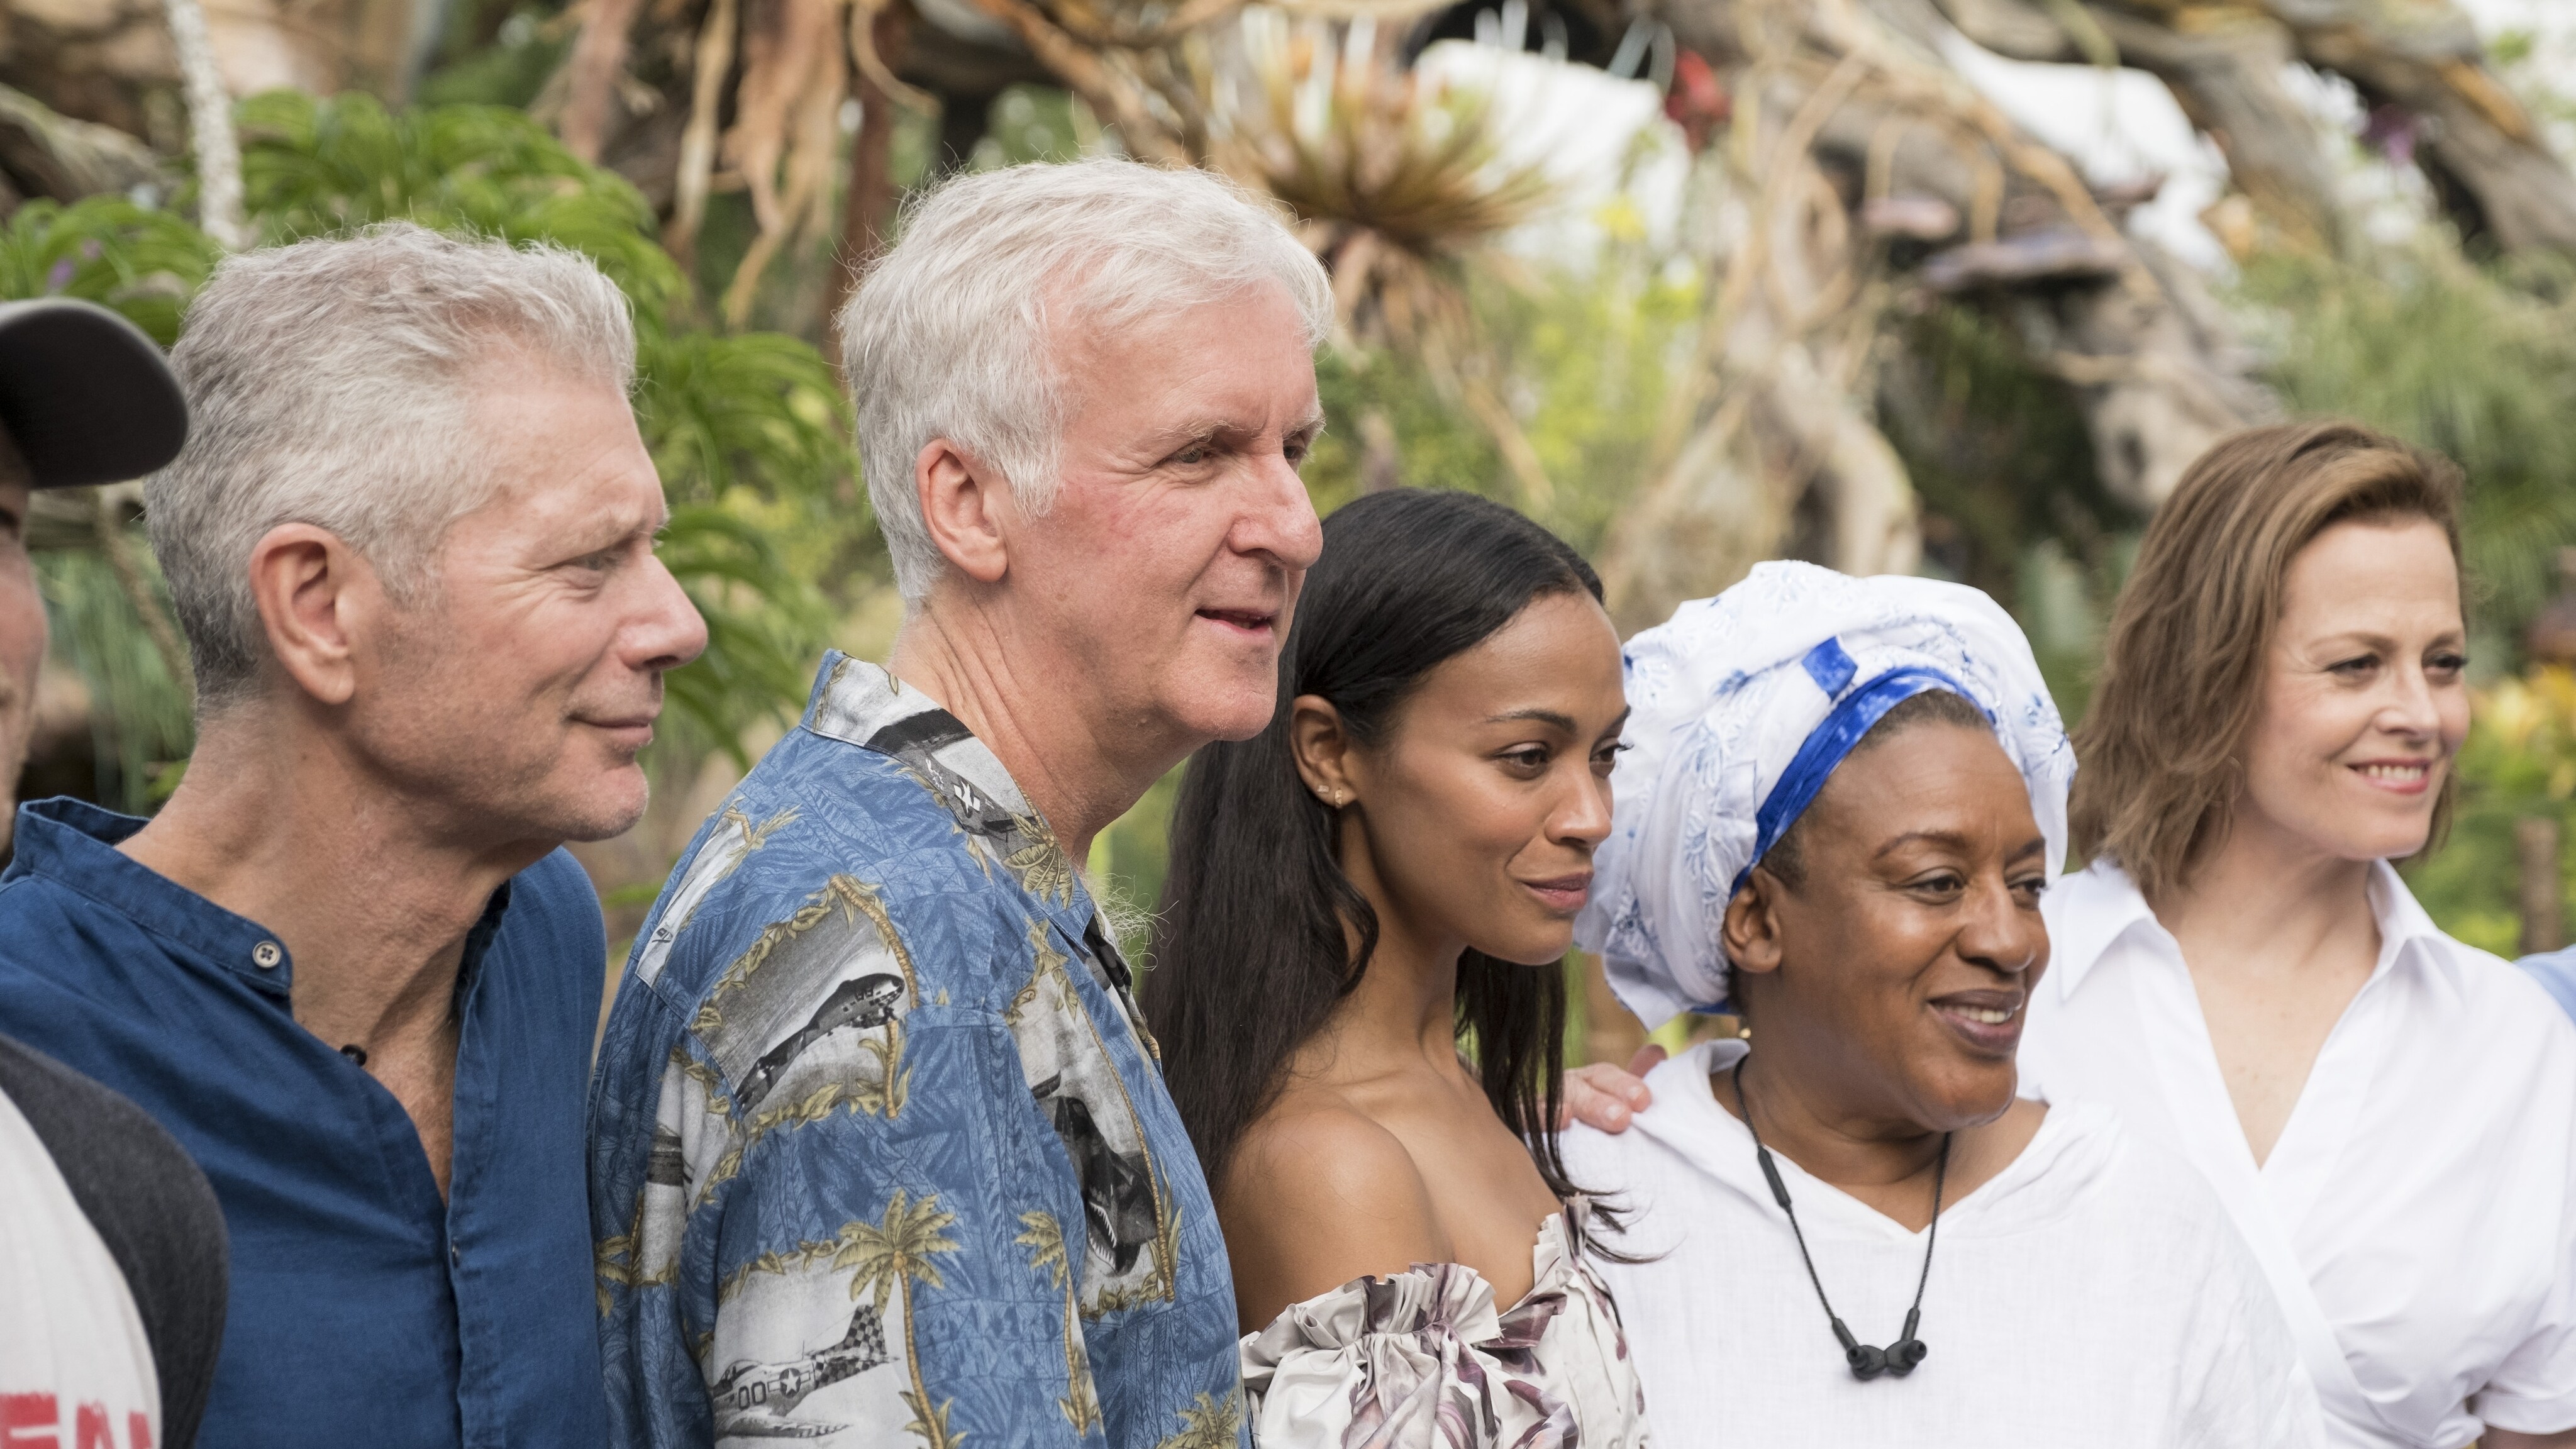 From left to right, Actor Stephen Lang, Director James Cameron, actors Zoe Saldana, CCH Pounder, and Sigourney Weaver